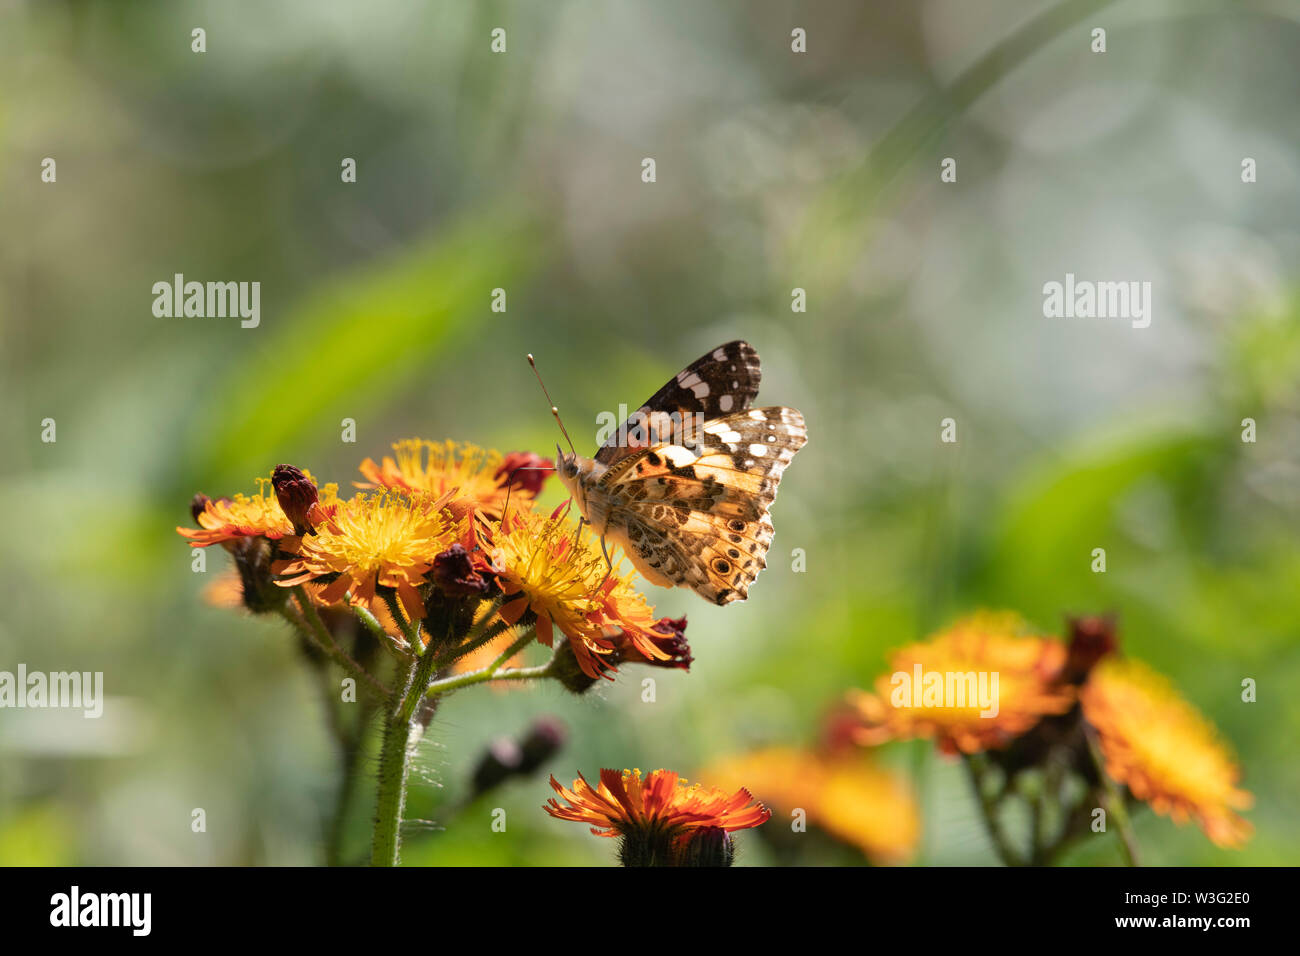 A Painted Lady Butterfly (Vanessa Cardui) Feeding on the Wildflower 'Fox and Cubs' (Pilosella Aurantiaca), Also Known as 'Devils Paintbrush' Stock Photo